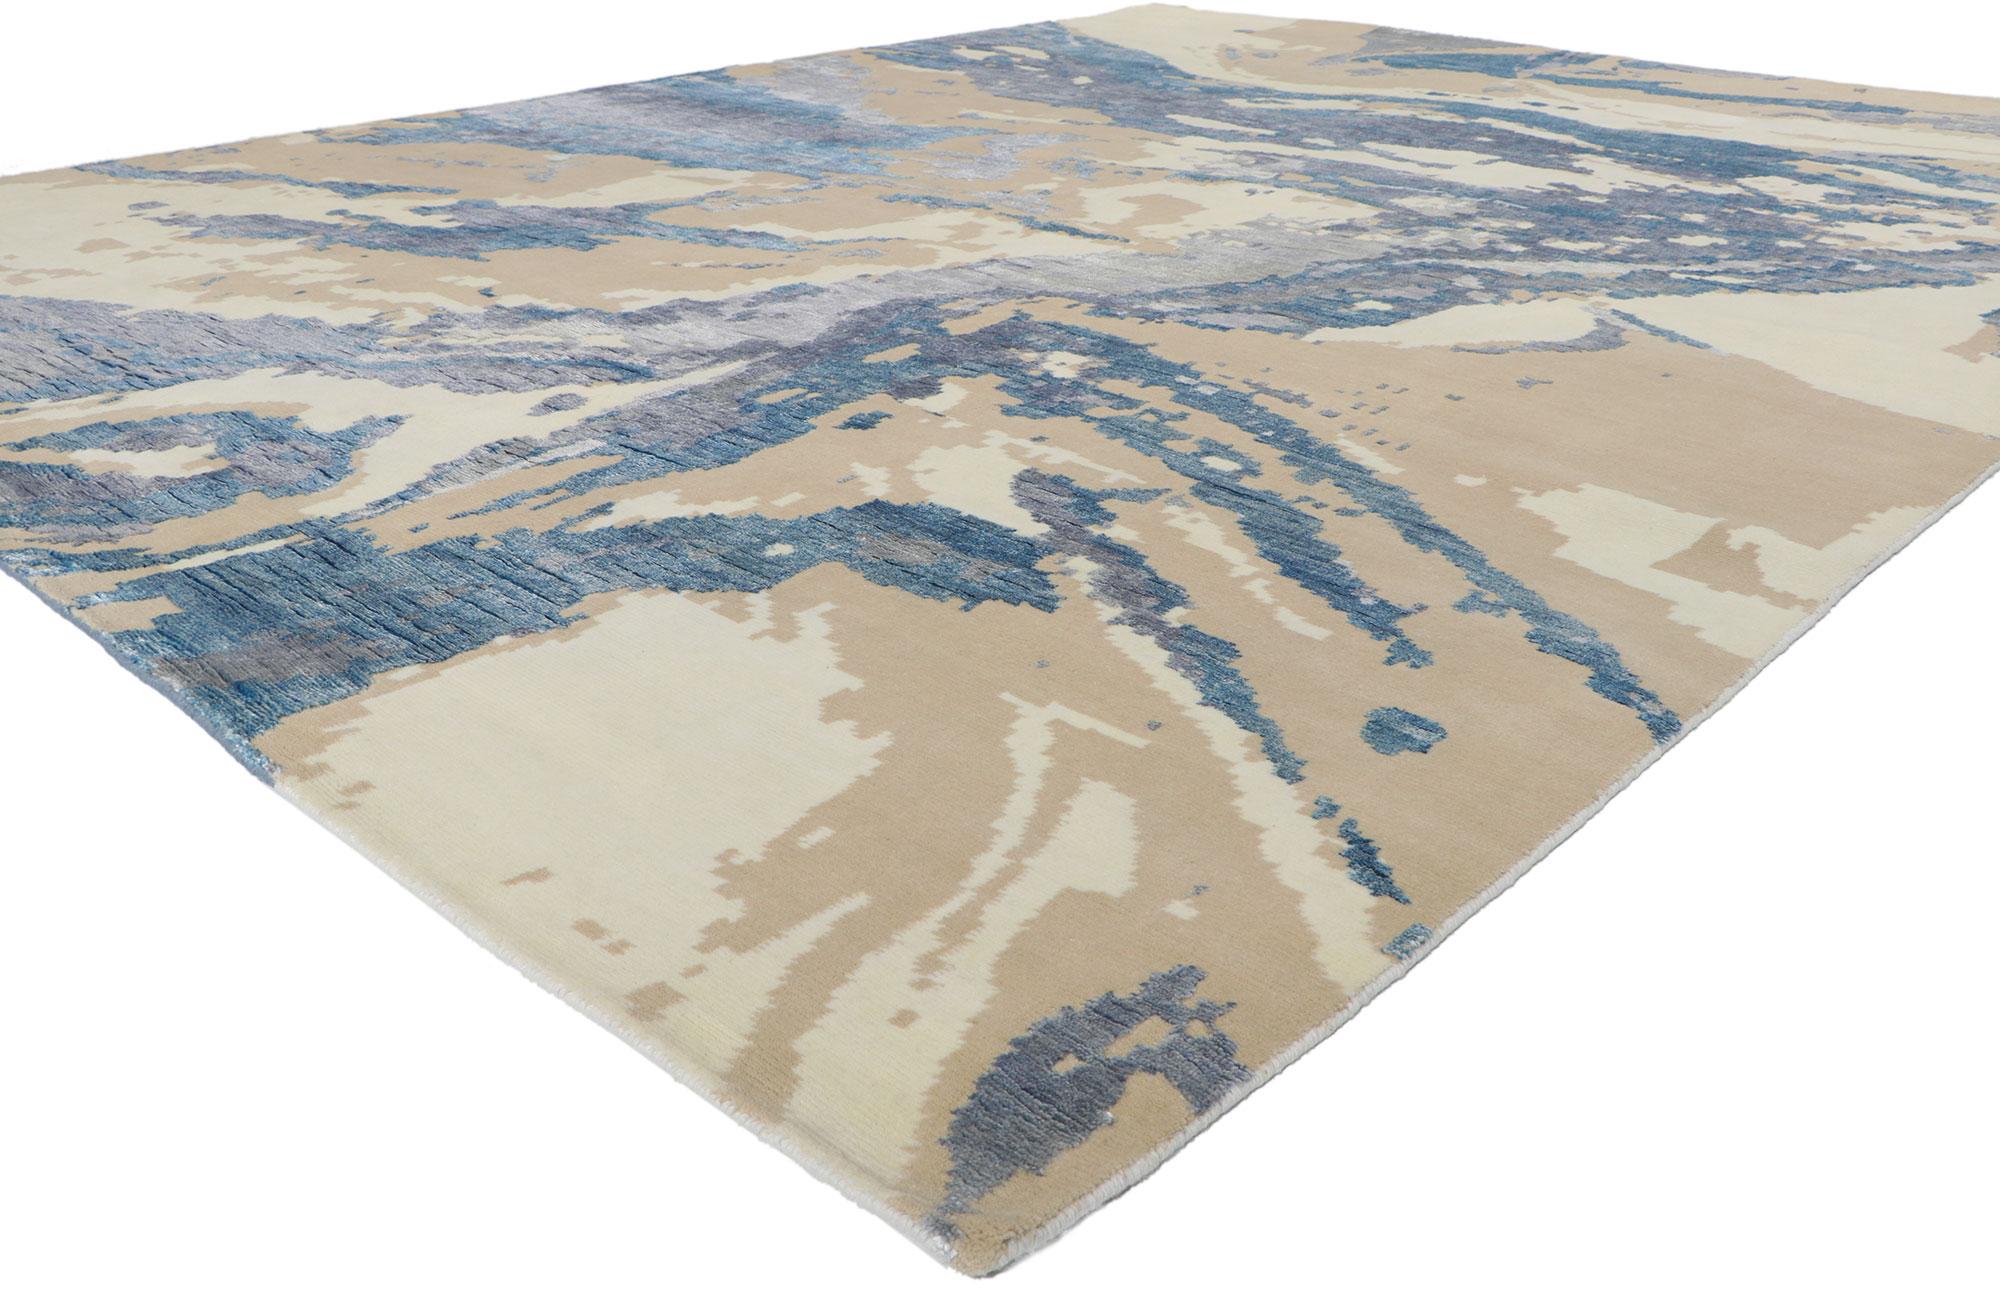 30879 New Contemporary Abstract rug, 09'01 x 12'00. Showcasing a modern style and raised silk design with incredible detail and texture, this hand knotted contemporary textured rug is a captivating vision of woven beauty. The eye-catching abstract